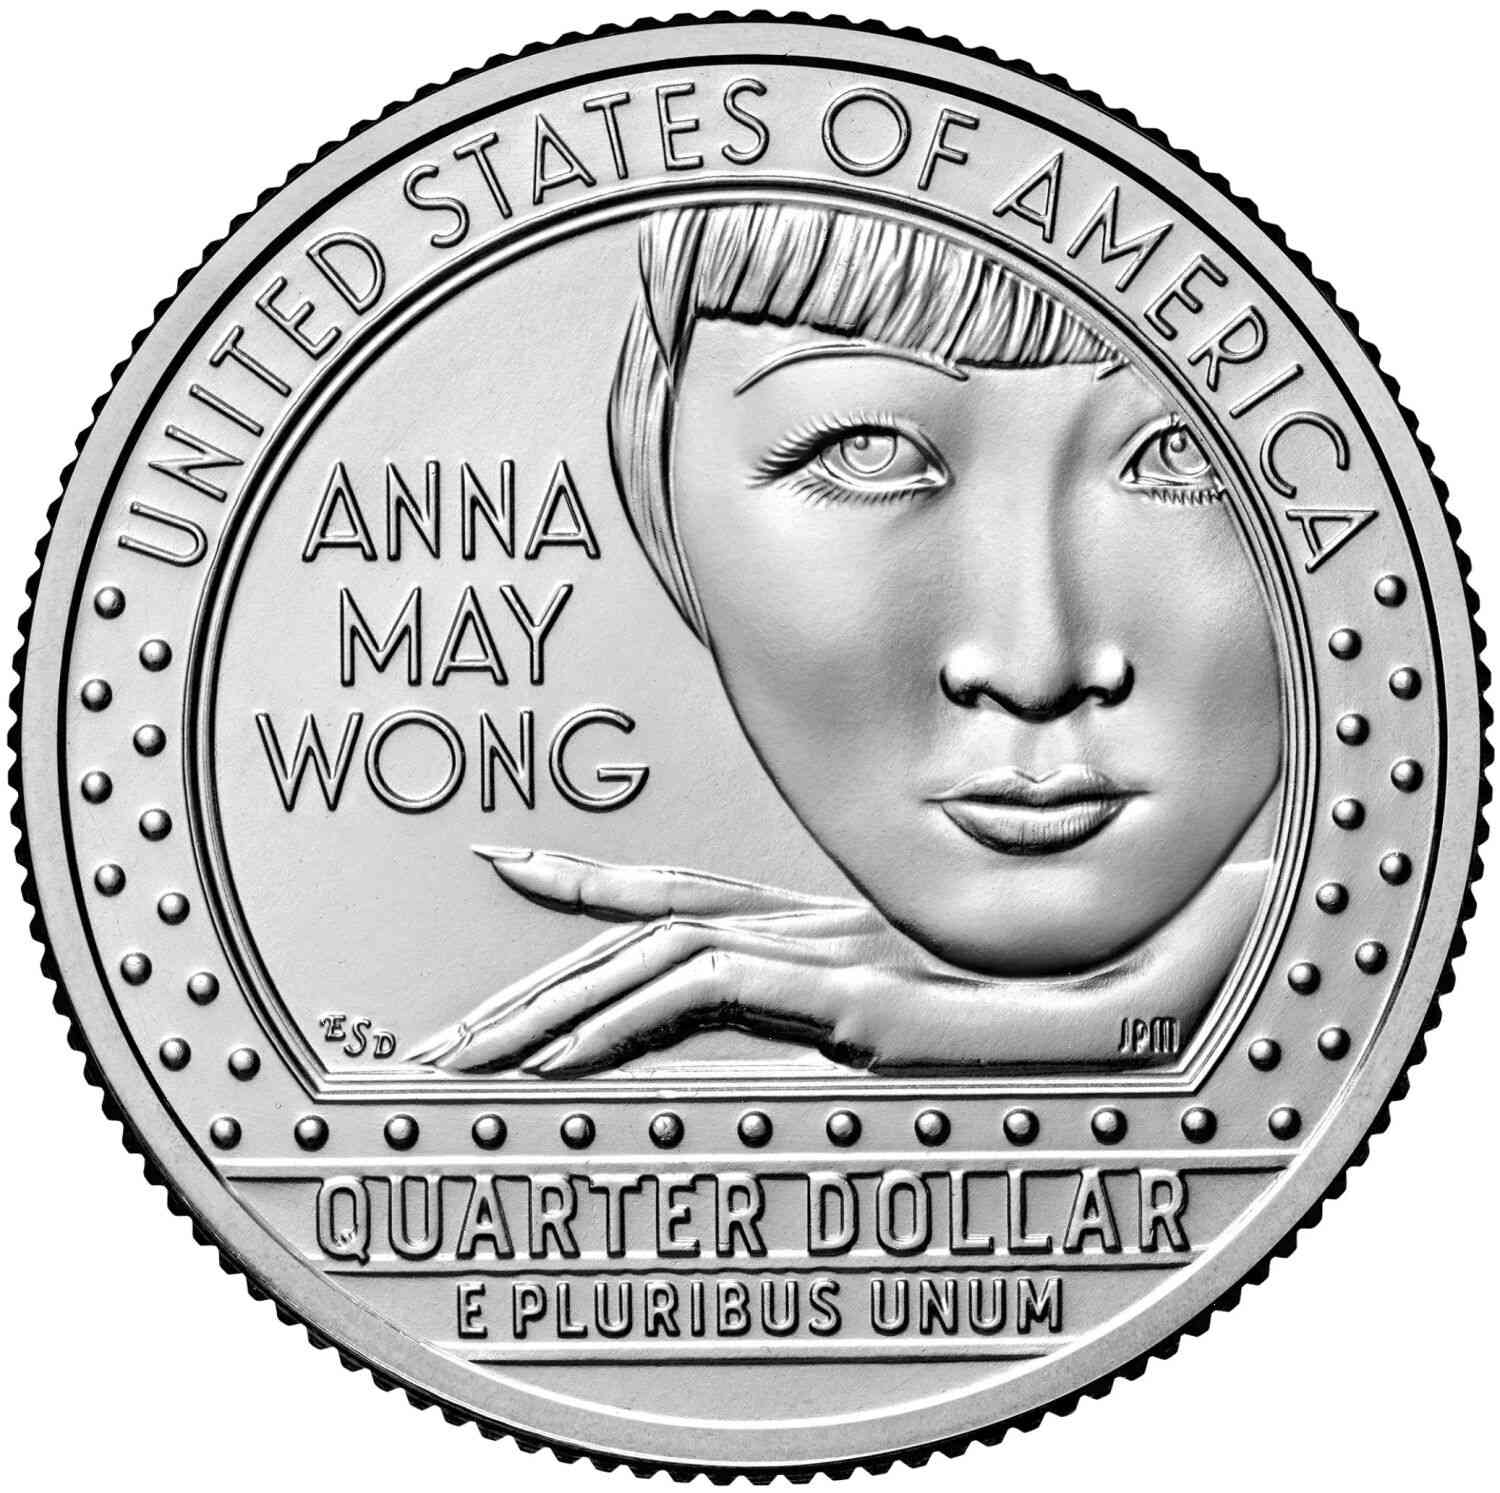 Anna May Wong to be the first Asian American woman to appear on U.S. currency